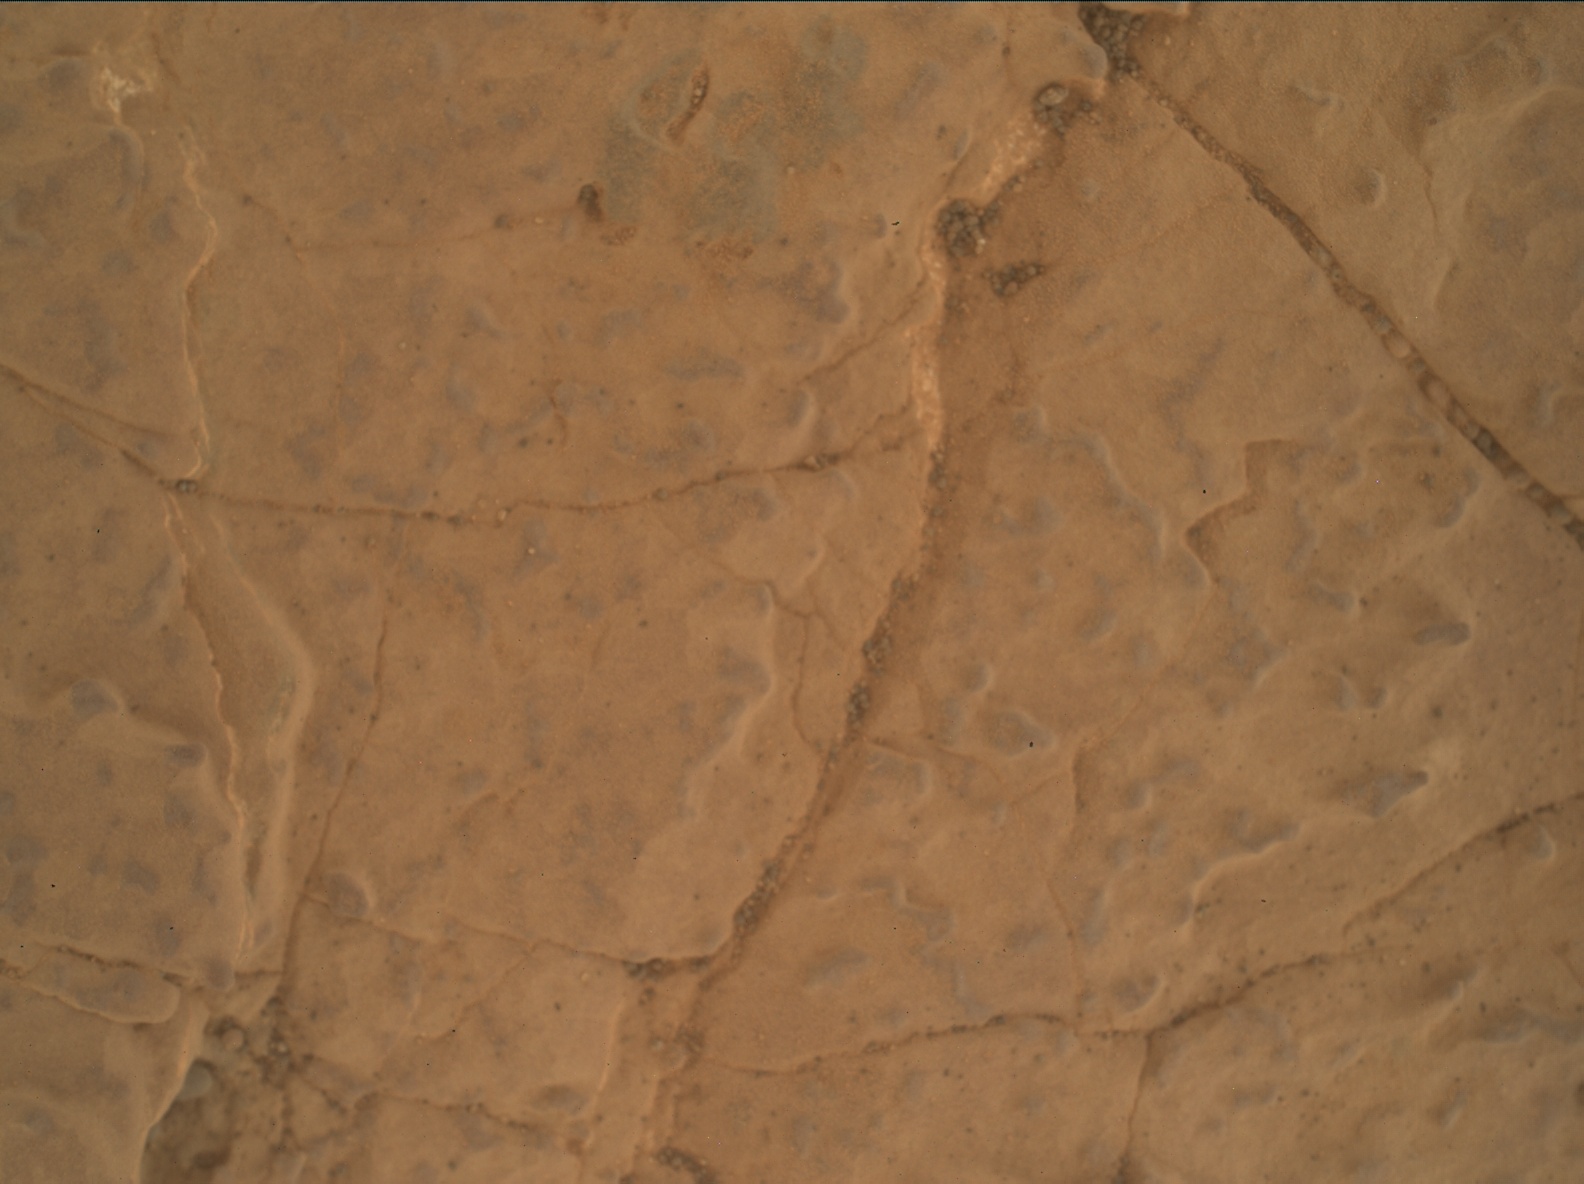 Nasa's Mars rover Curiosity acquired this image using its Mars Hand Lens Imager (MAHLI) on Sol 3027